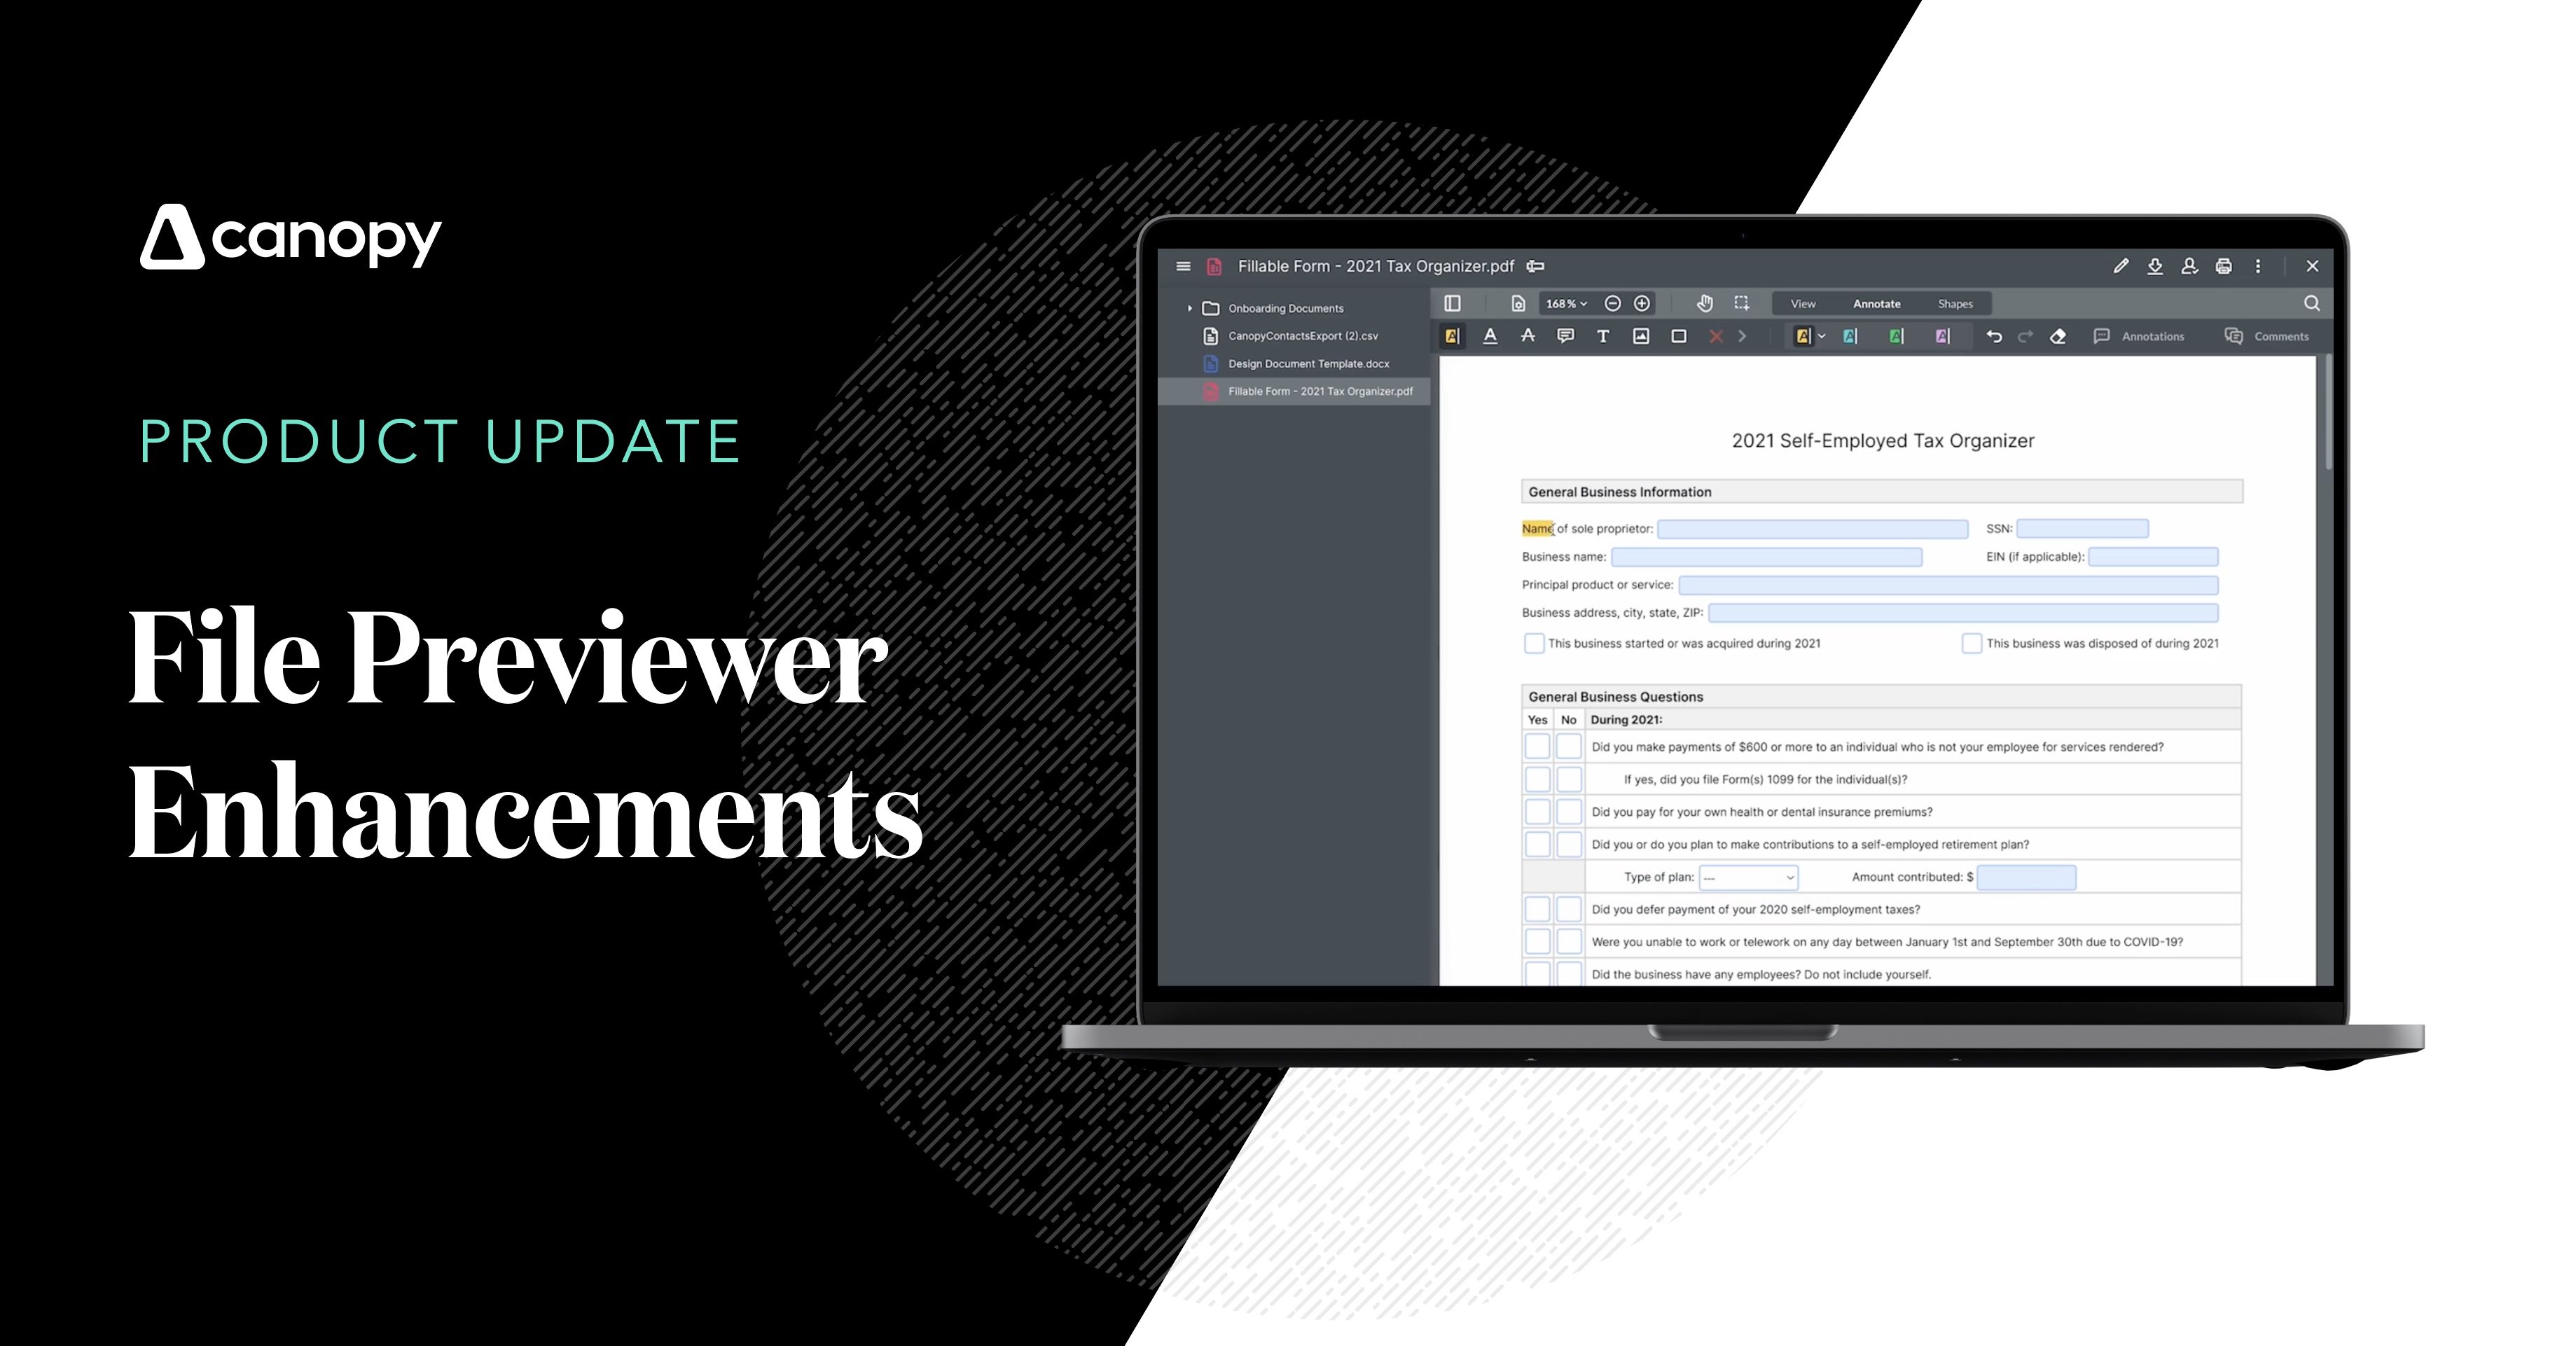 Enjoy Working on Documents More with New File Previewer Enhancements